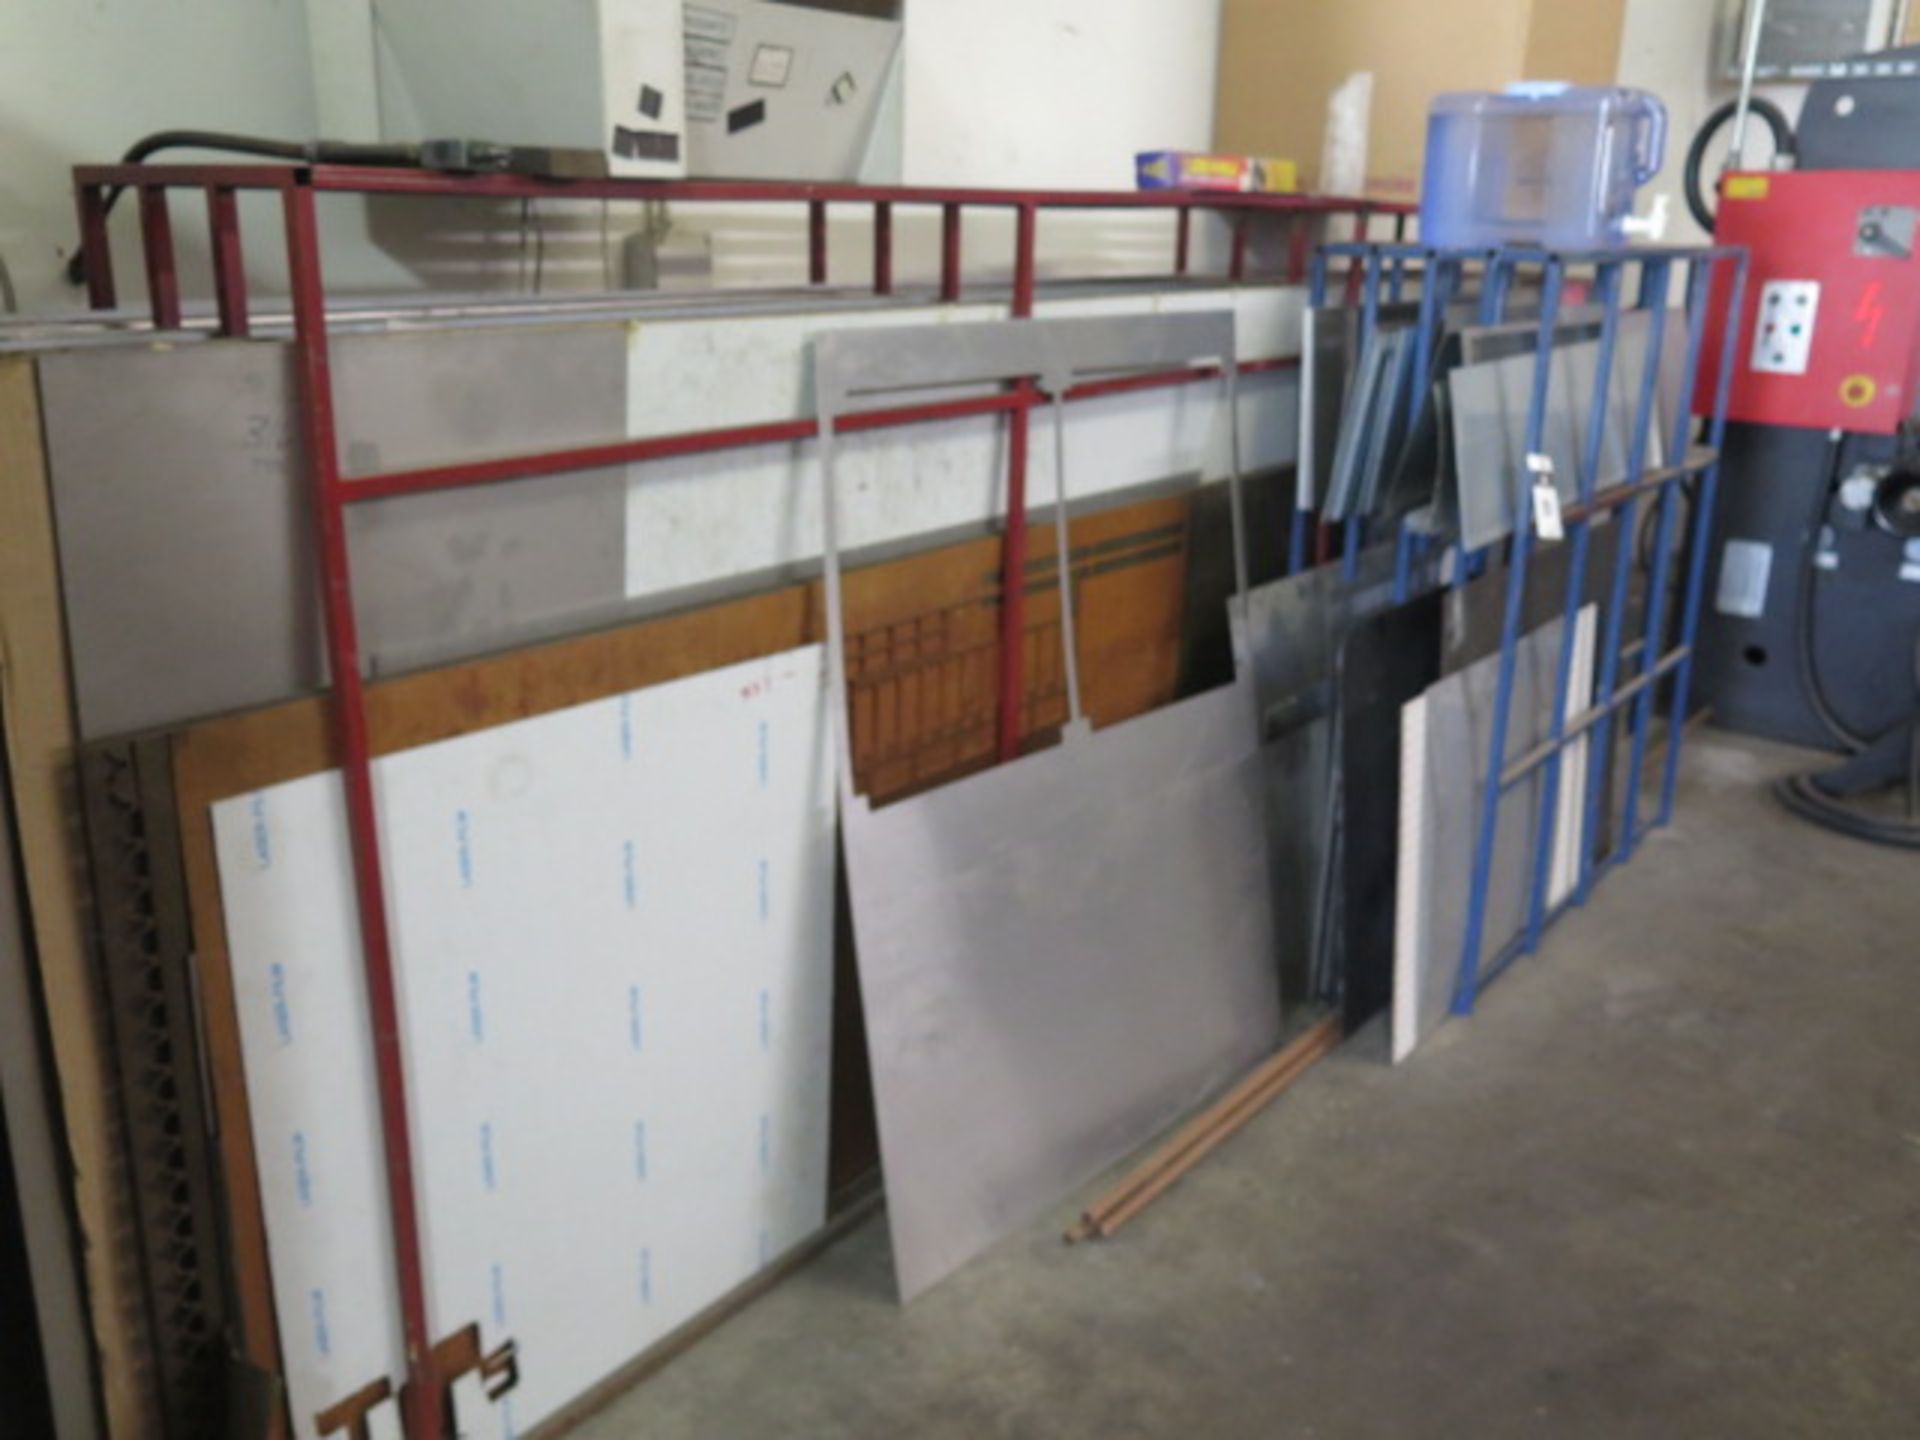 Aluminum, Copper,v Stainless and Cold Roll Sheet Stock w/ Rack (SOLD AS-IS - NO WARRANTY) - Image 8 of 8